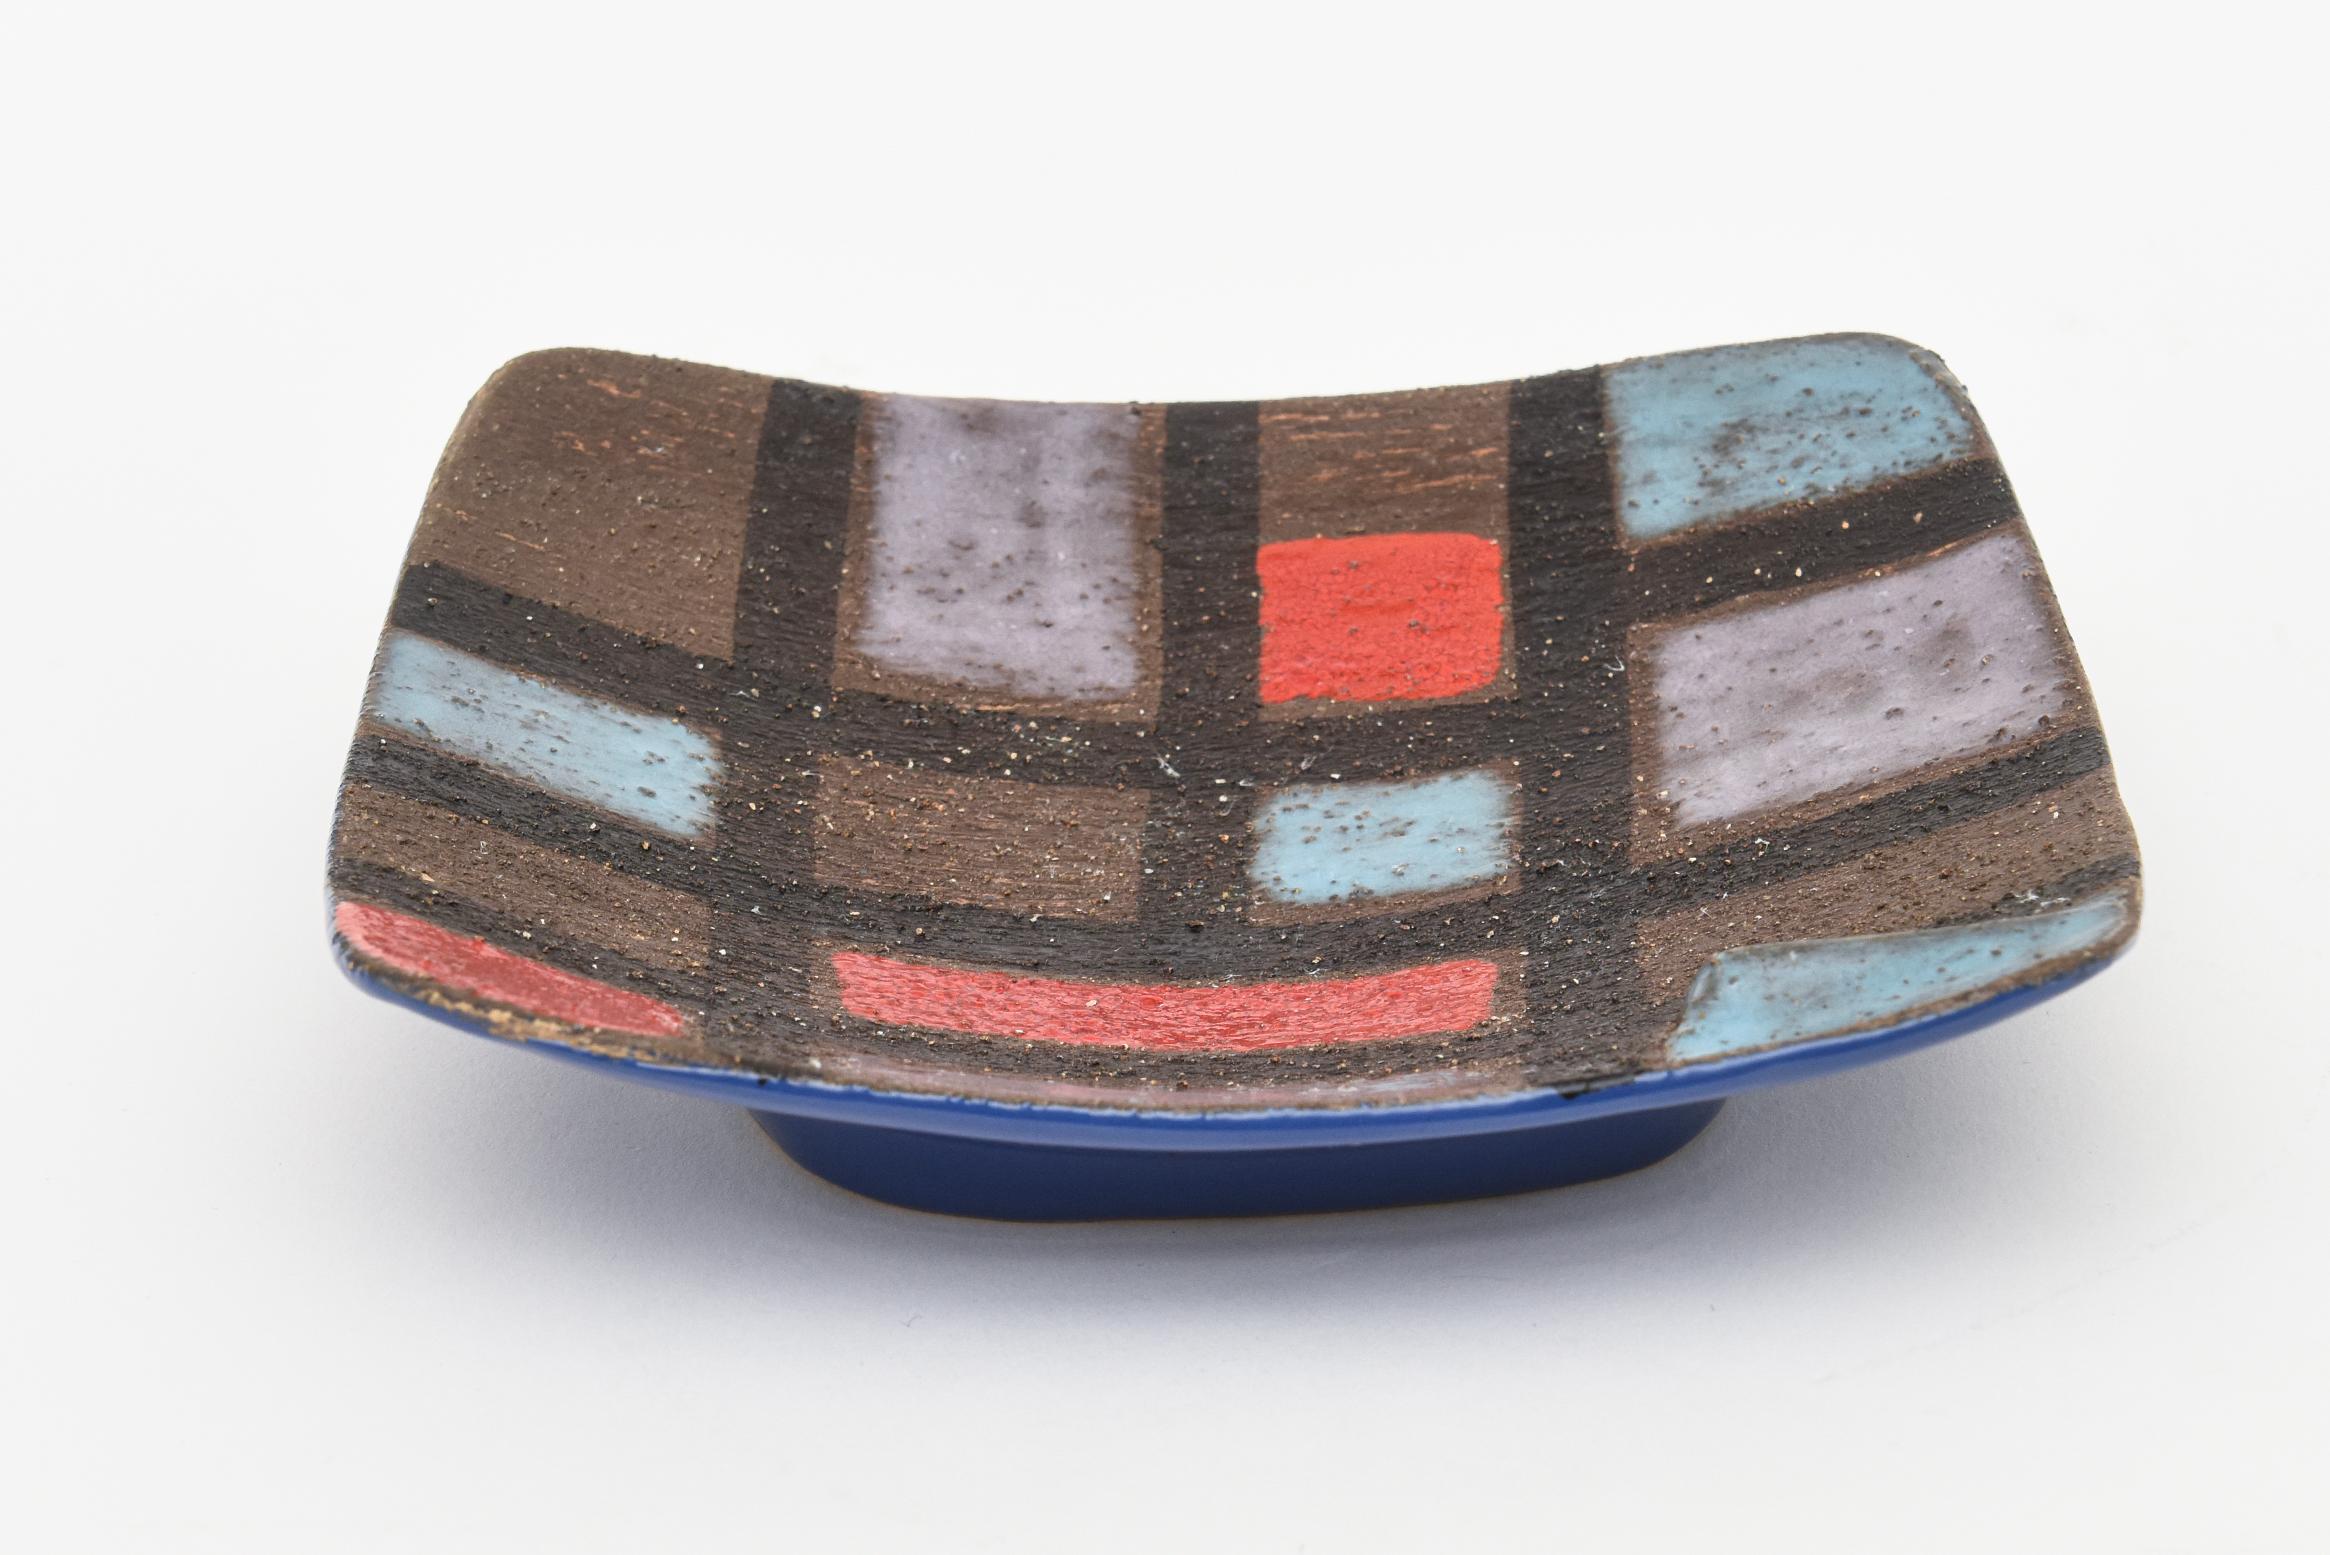 This lovely vintage Italian ceramic textural colorful patchwork bowl is signed Raymor and was designed by Bitossi. This is from the 1960s. The hallmarks on the bottom read R450-SA Raymor Italy. It is rough textured color grid of black, brown red,